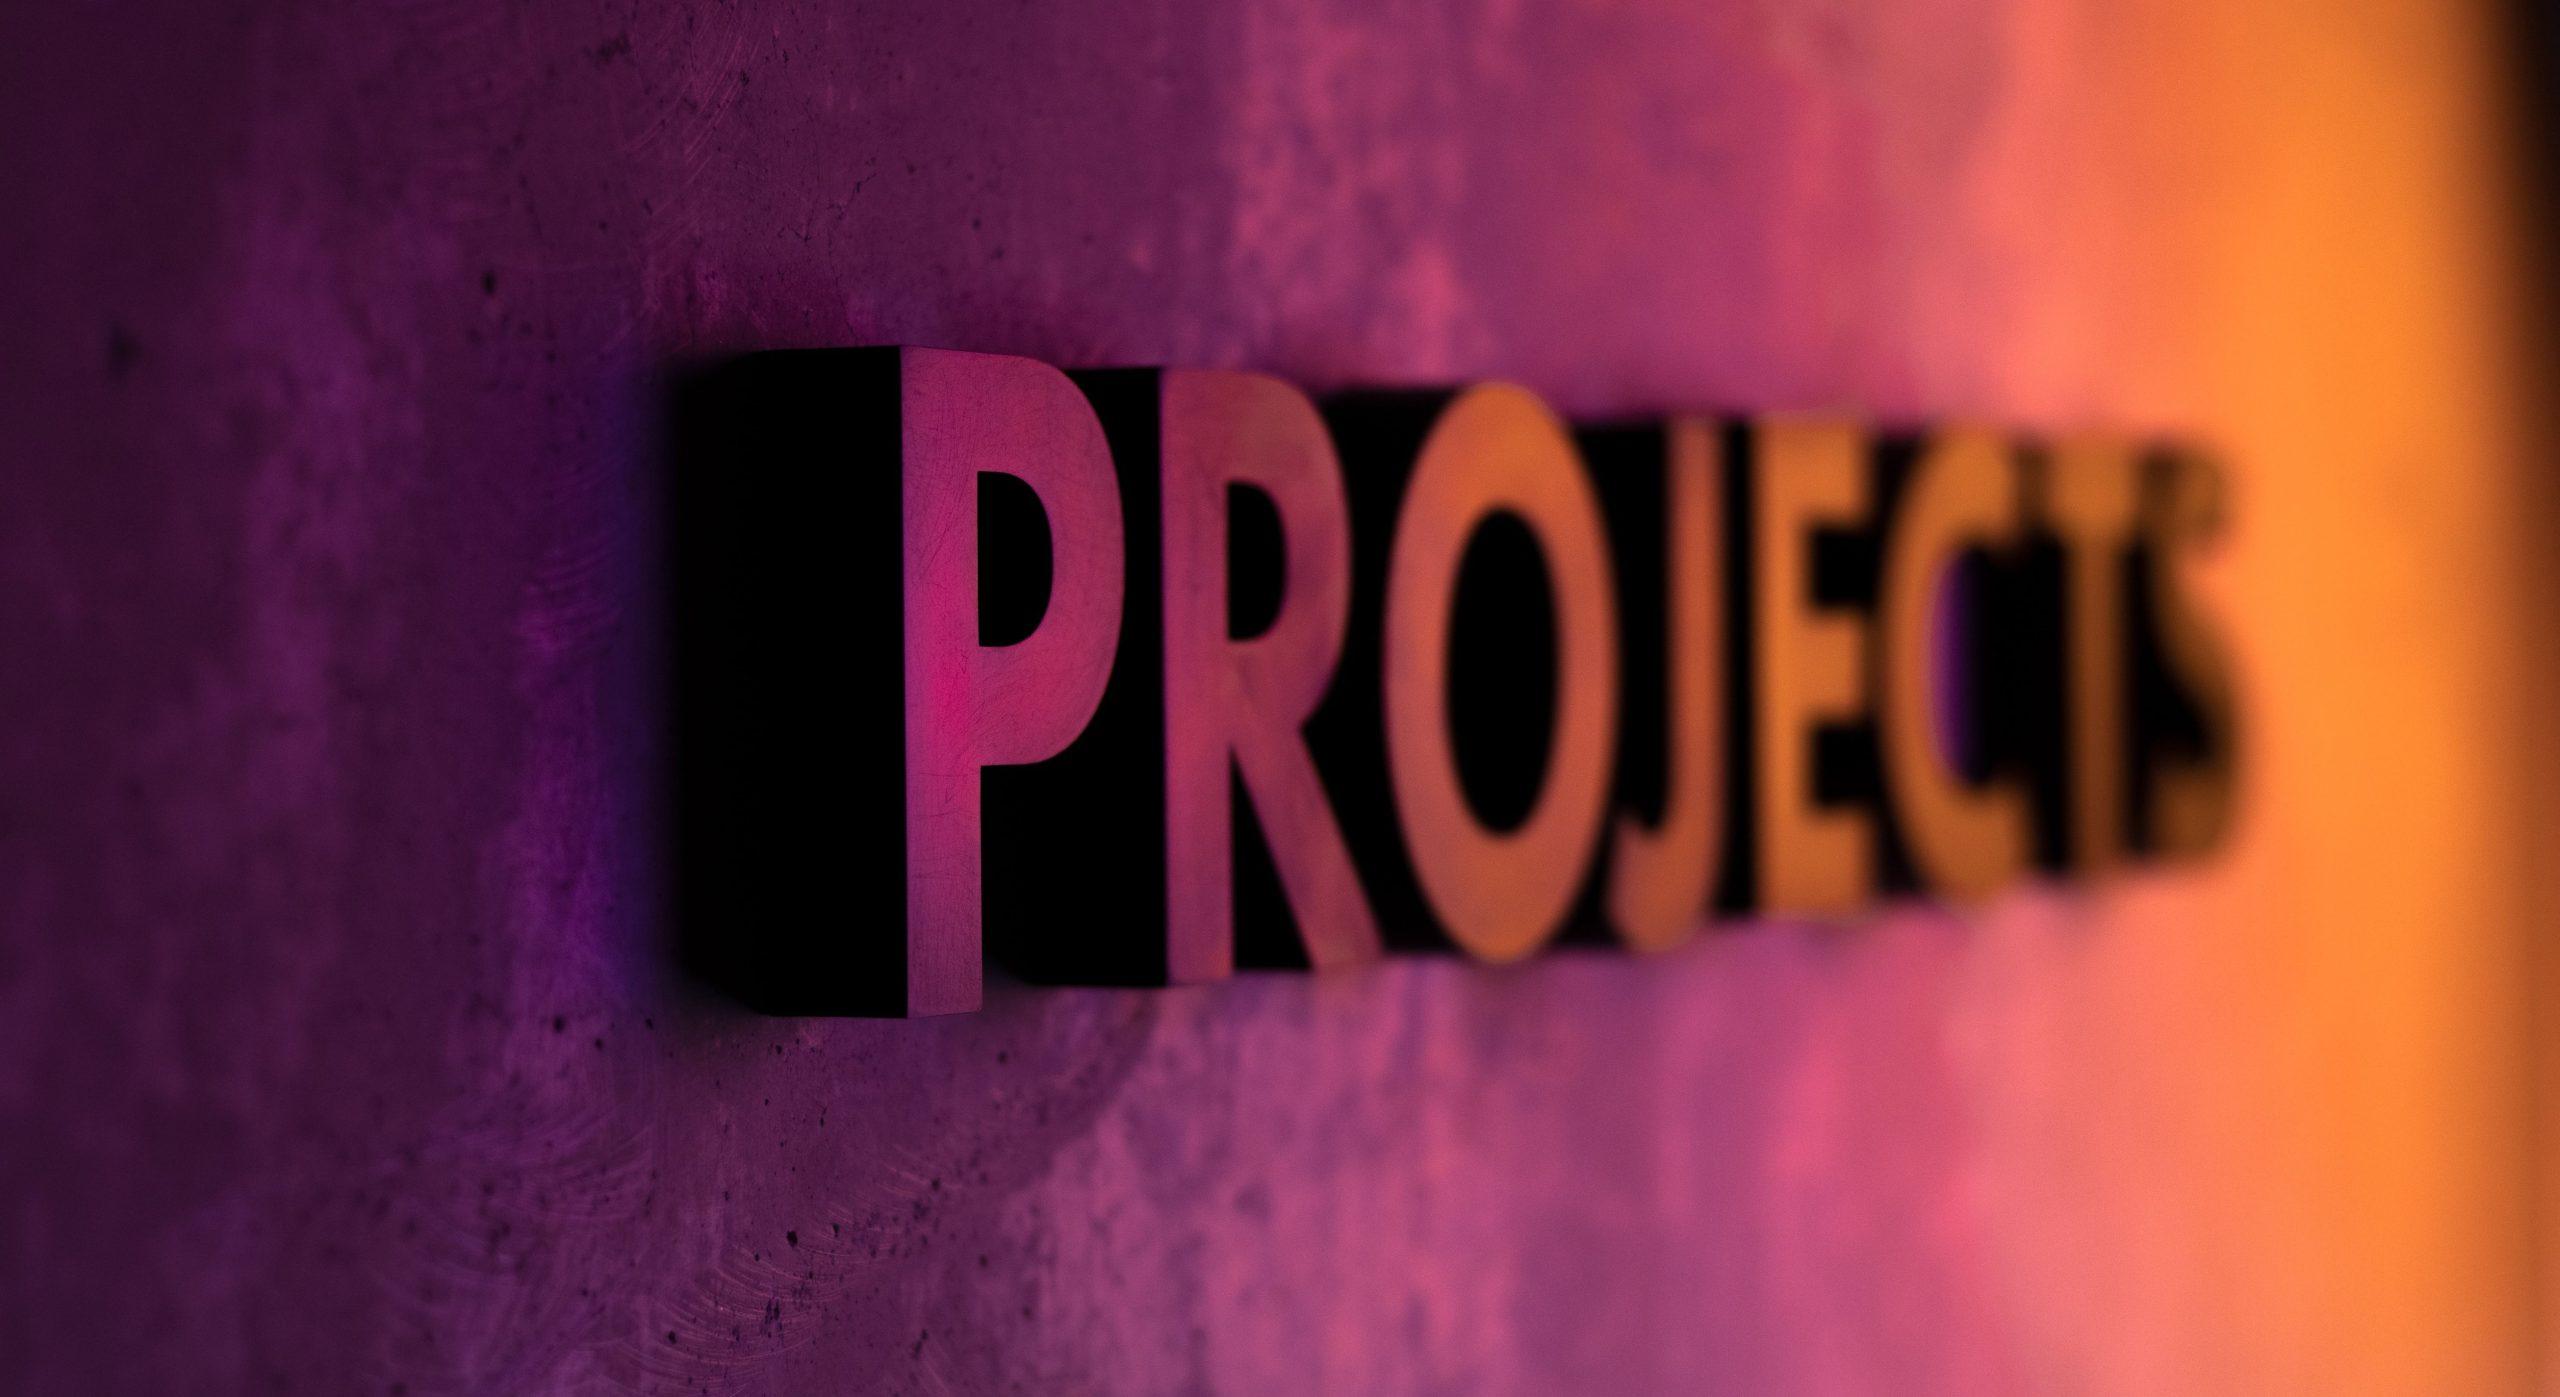 Colourful wall with the word 'PROJECTS' featured.